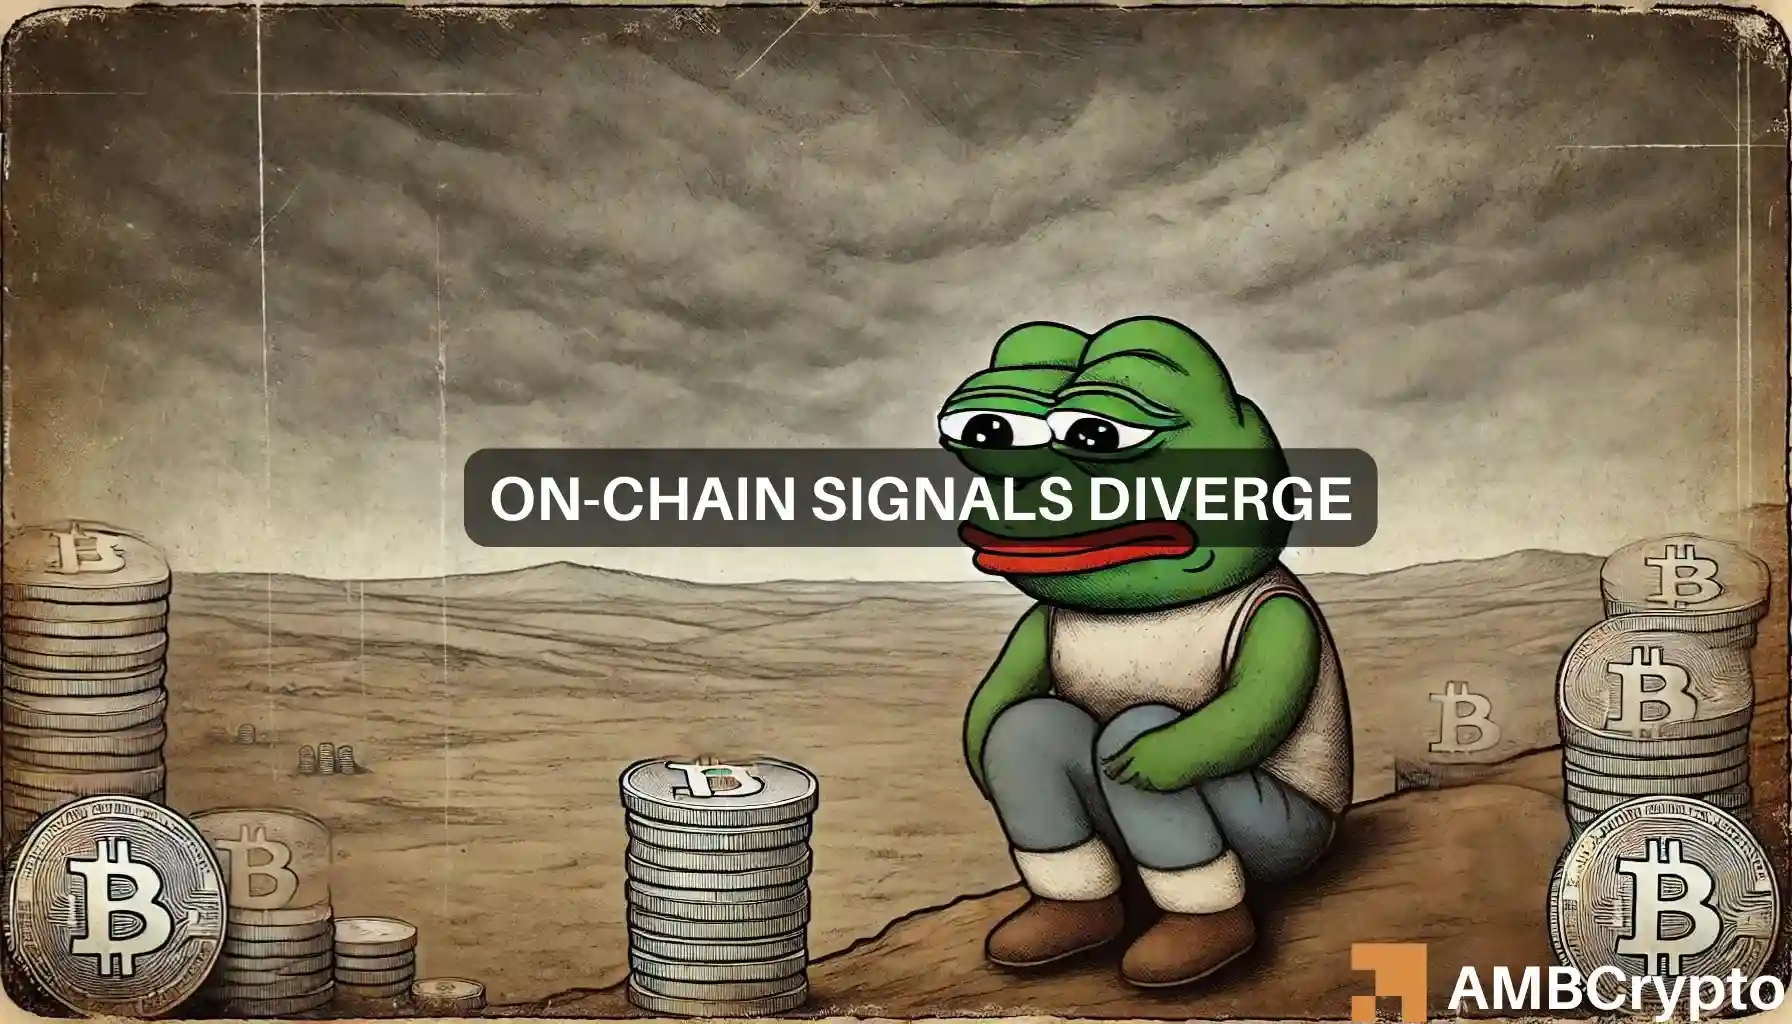 THESE mixed signals mean PEPE’s short-term holders should be careful